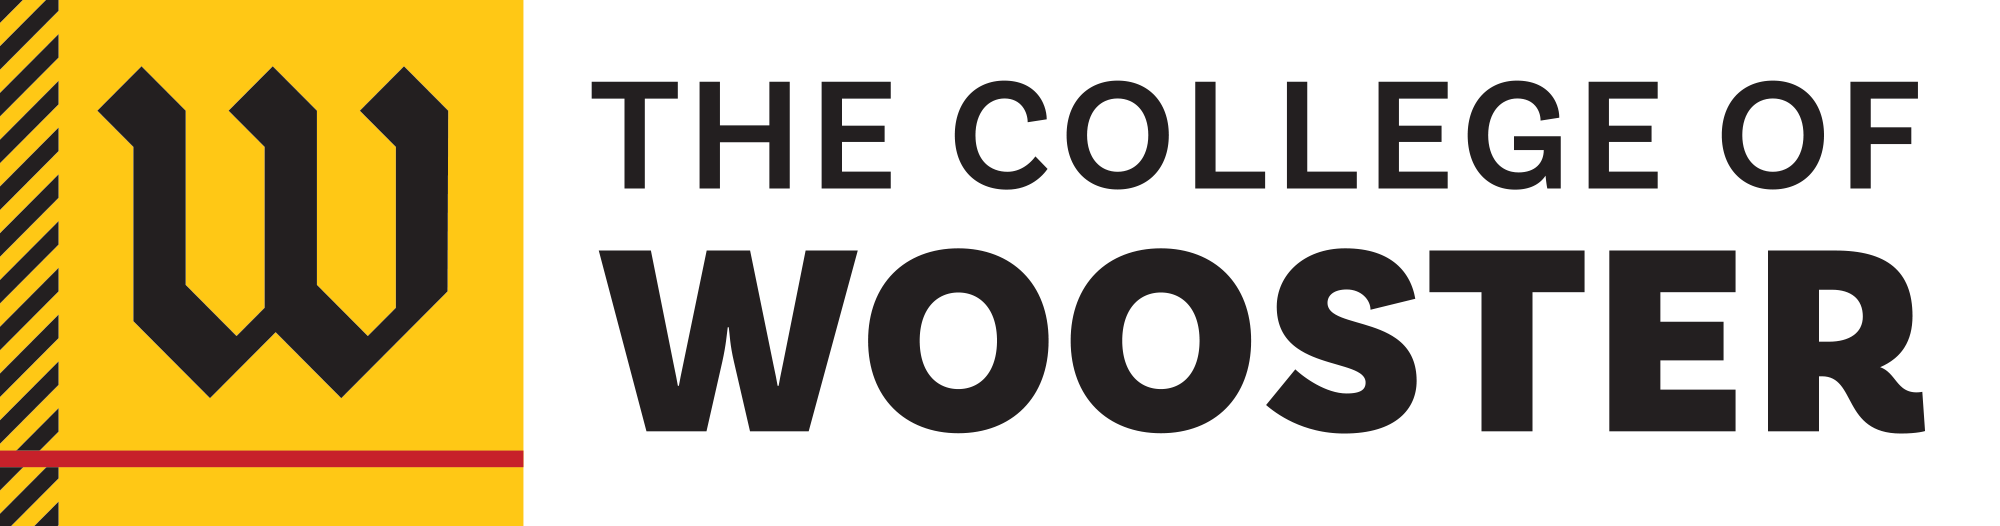 wooster-college-logo